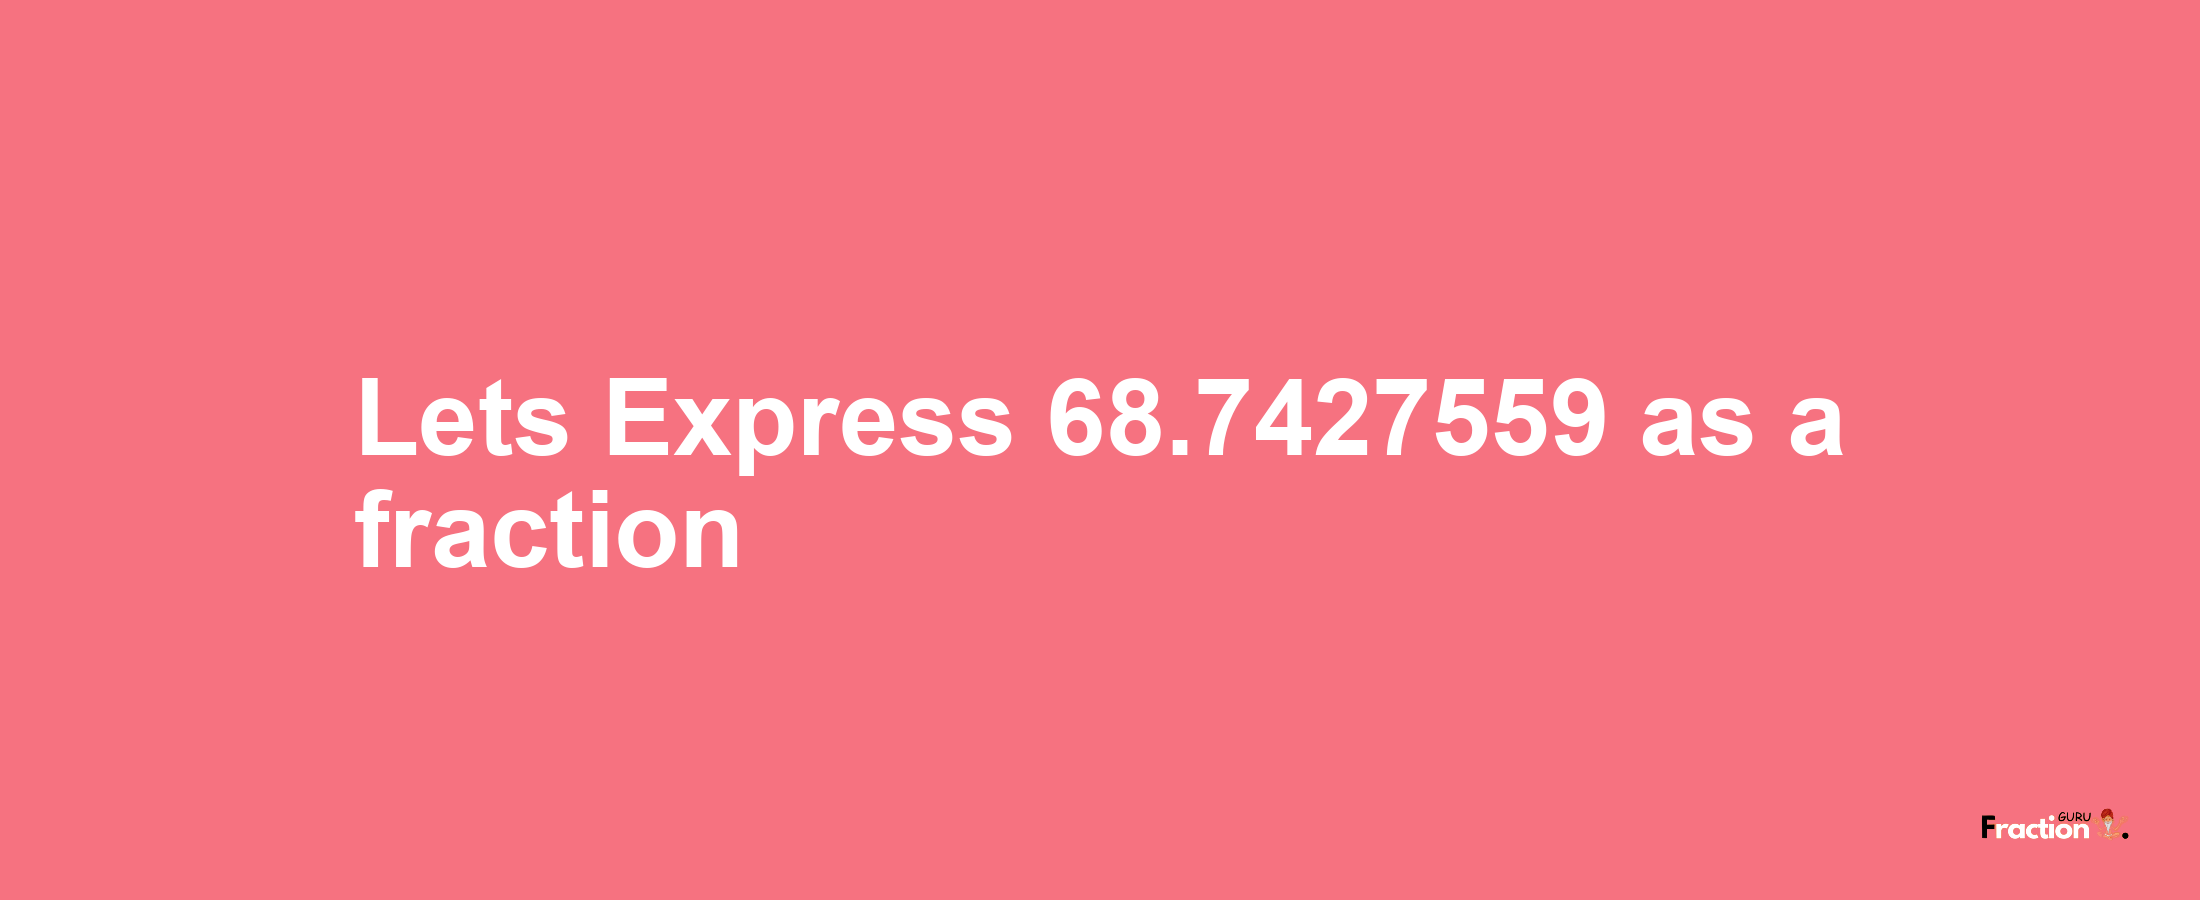 Lets Express 68.7427559 as afraction